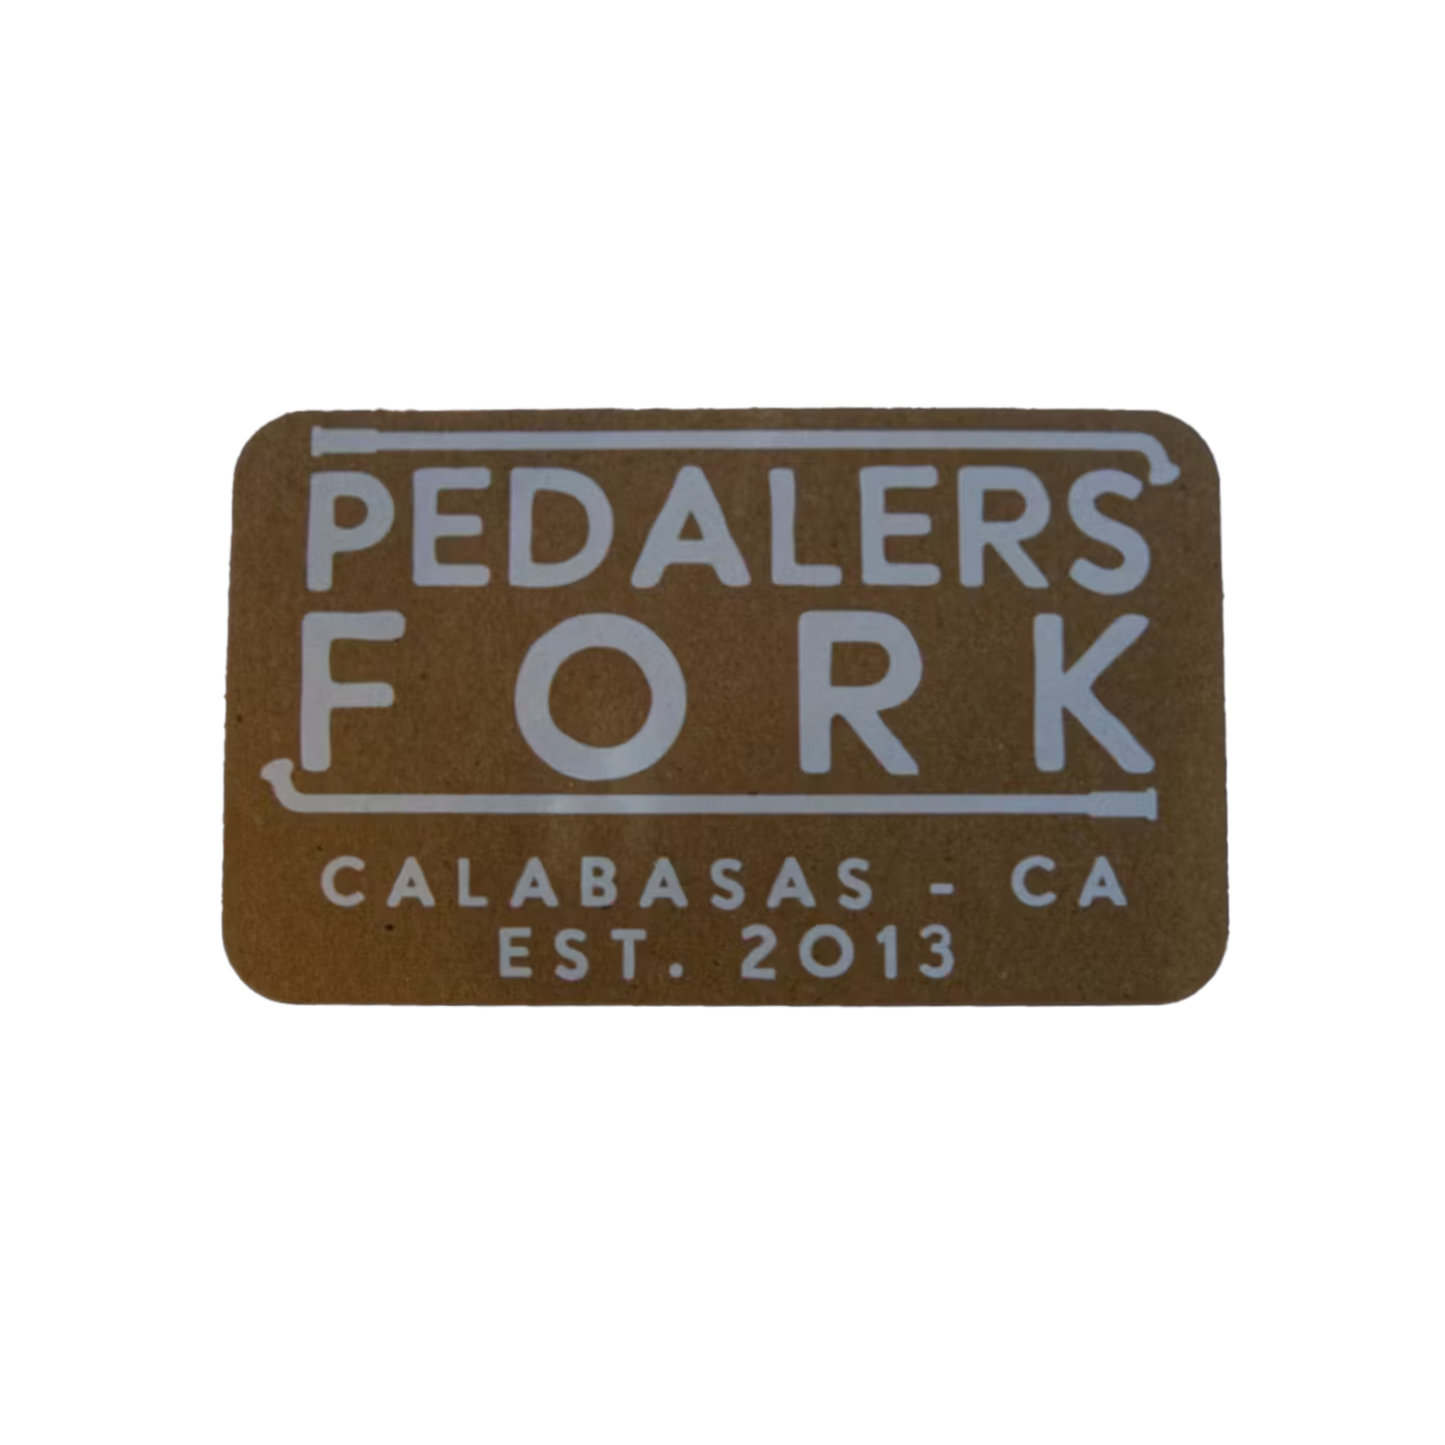 Brown colored sticker with text "Pedalers Fork Calabasas-CA EST. 2013"